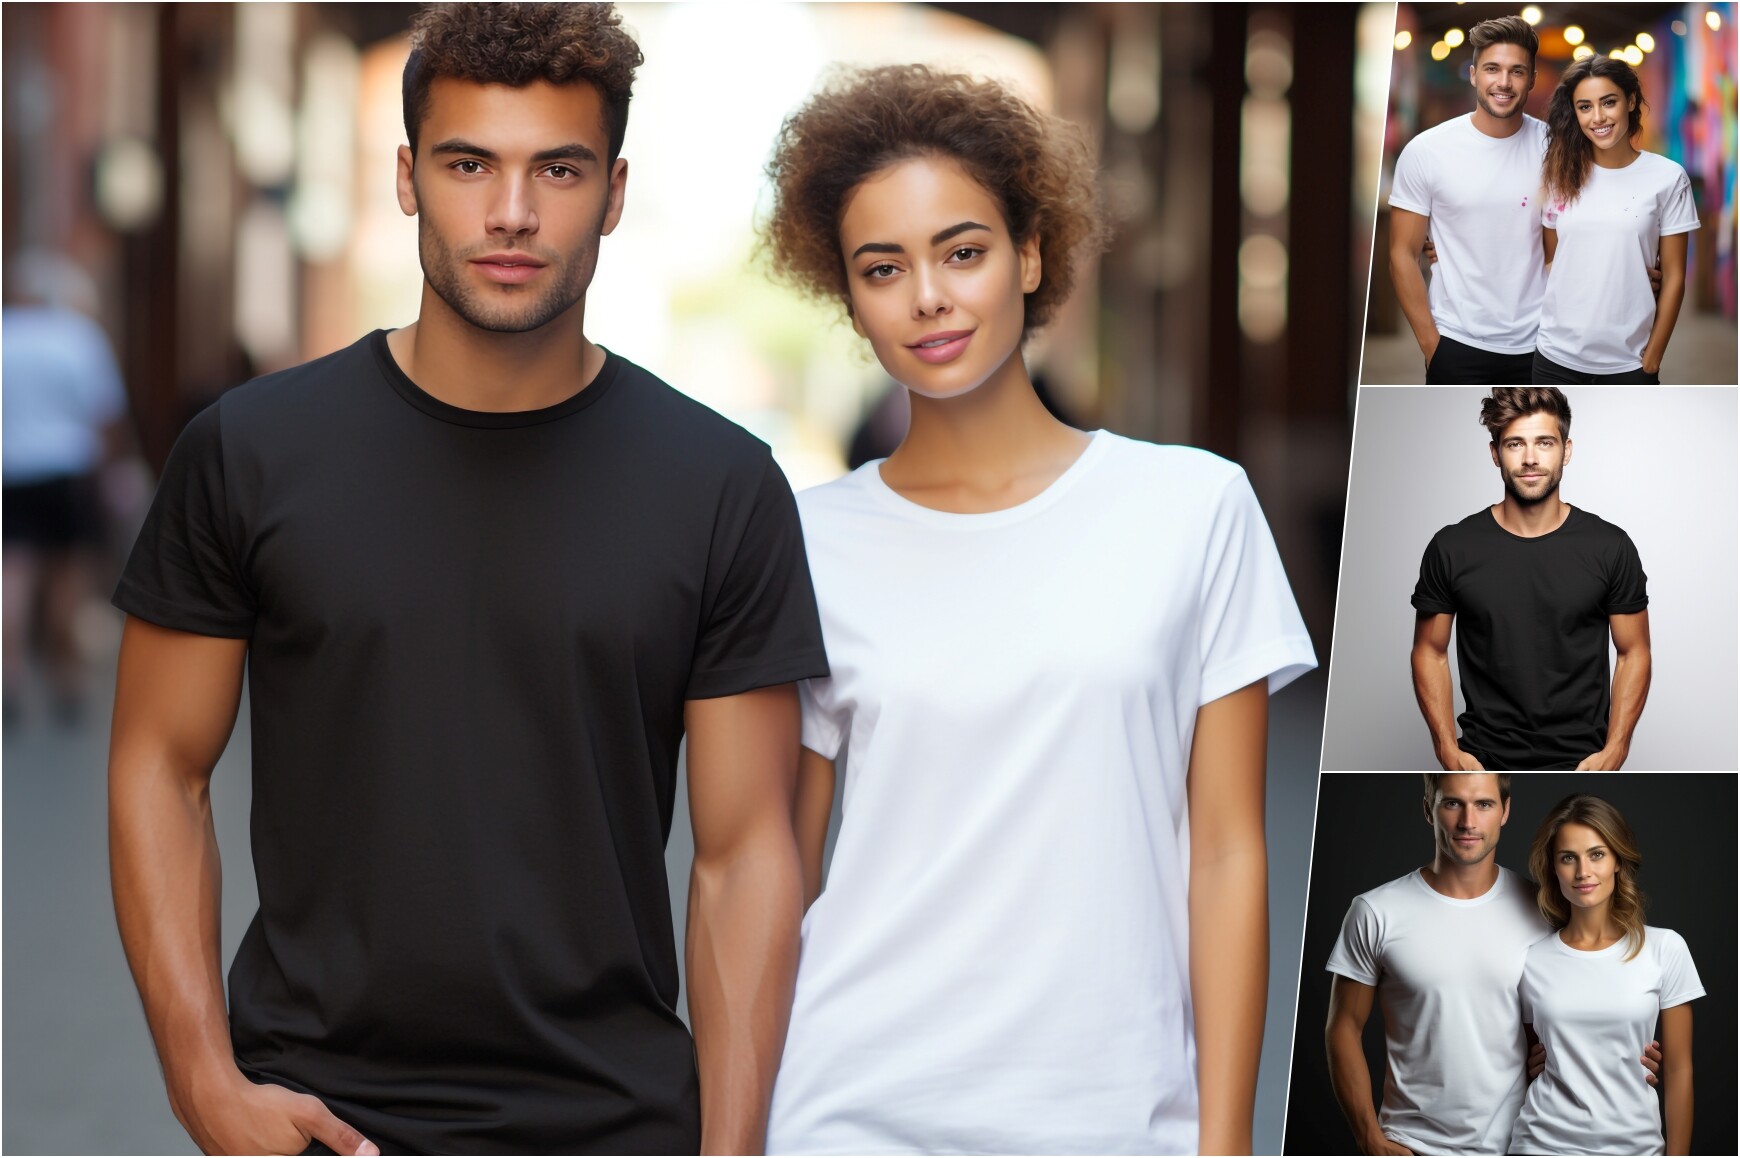 Black White T-Shirt Mockup Graphic by Background Graphics illustration ...